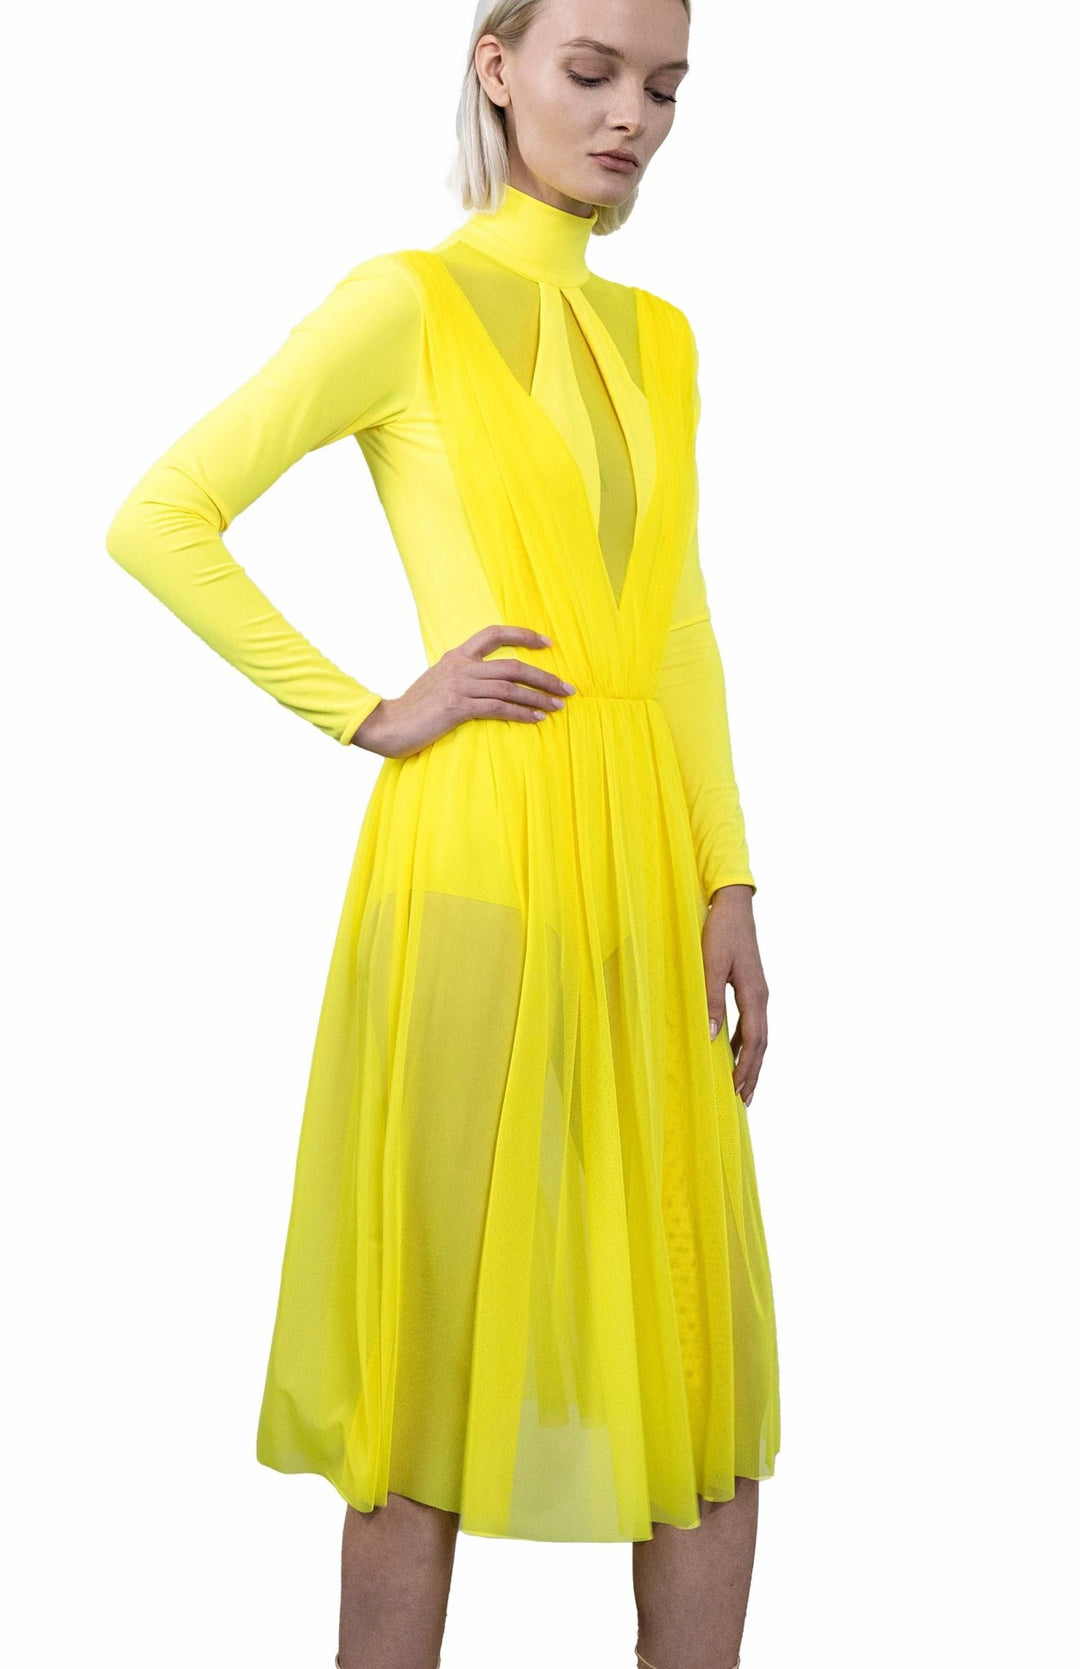 Neon yellow, ballerina style, bodysuit dress, with long sleeves, turtleneck and gathered sheer skirt below the knee.